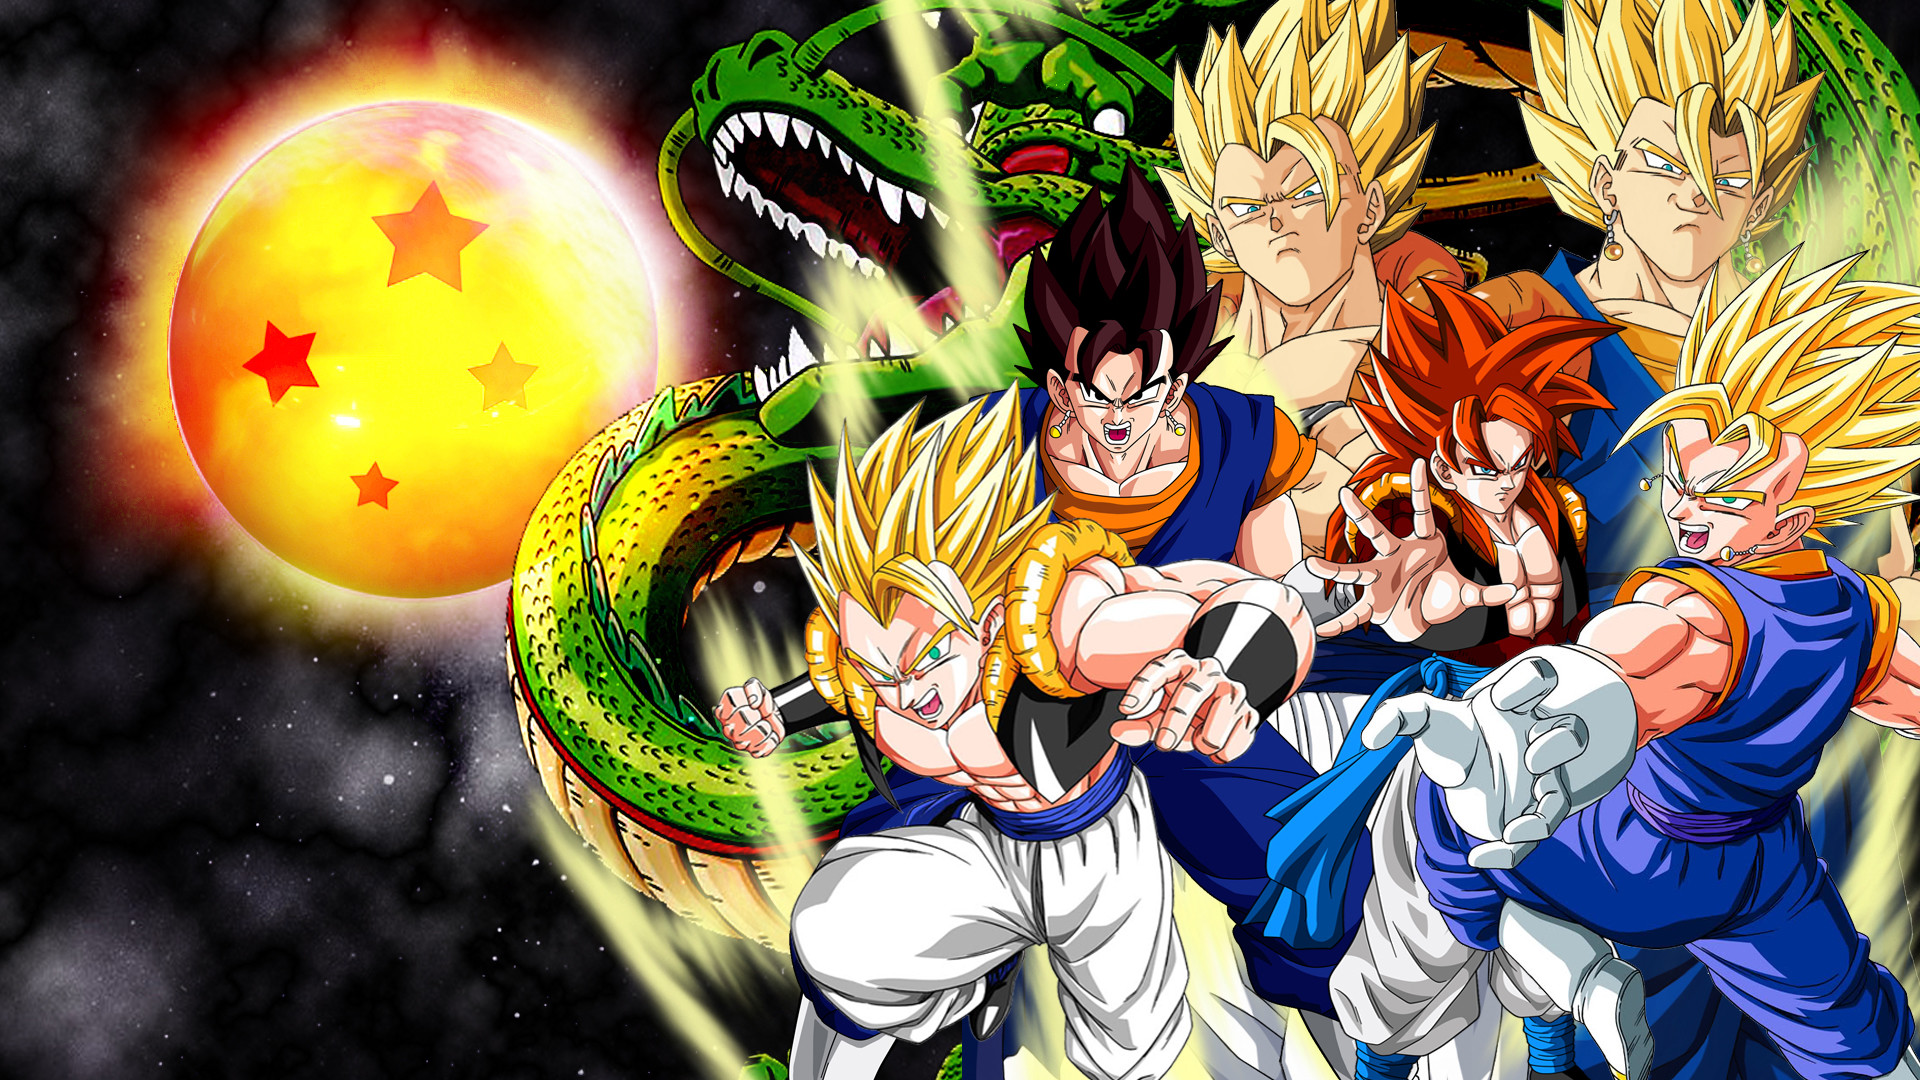 1920x1080 HD Wallpapers Dragon Ball Z Wallpapers) – HD Wallpapers